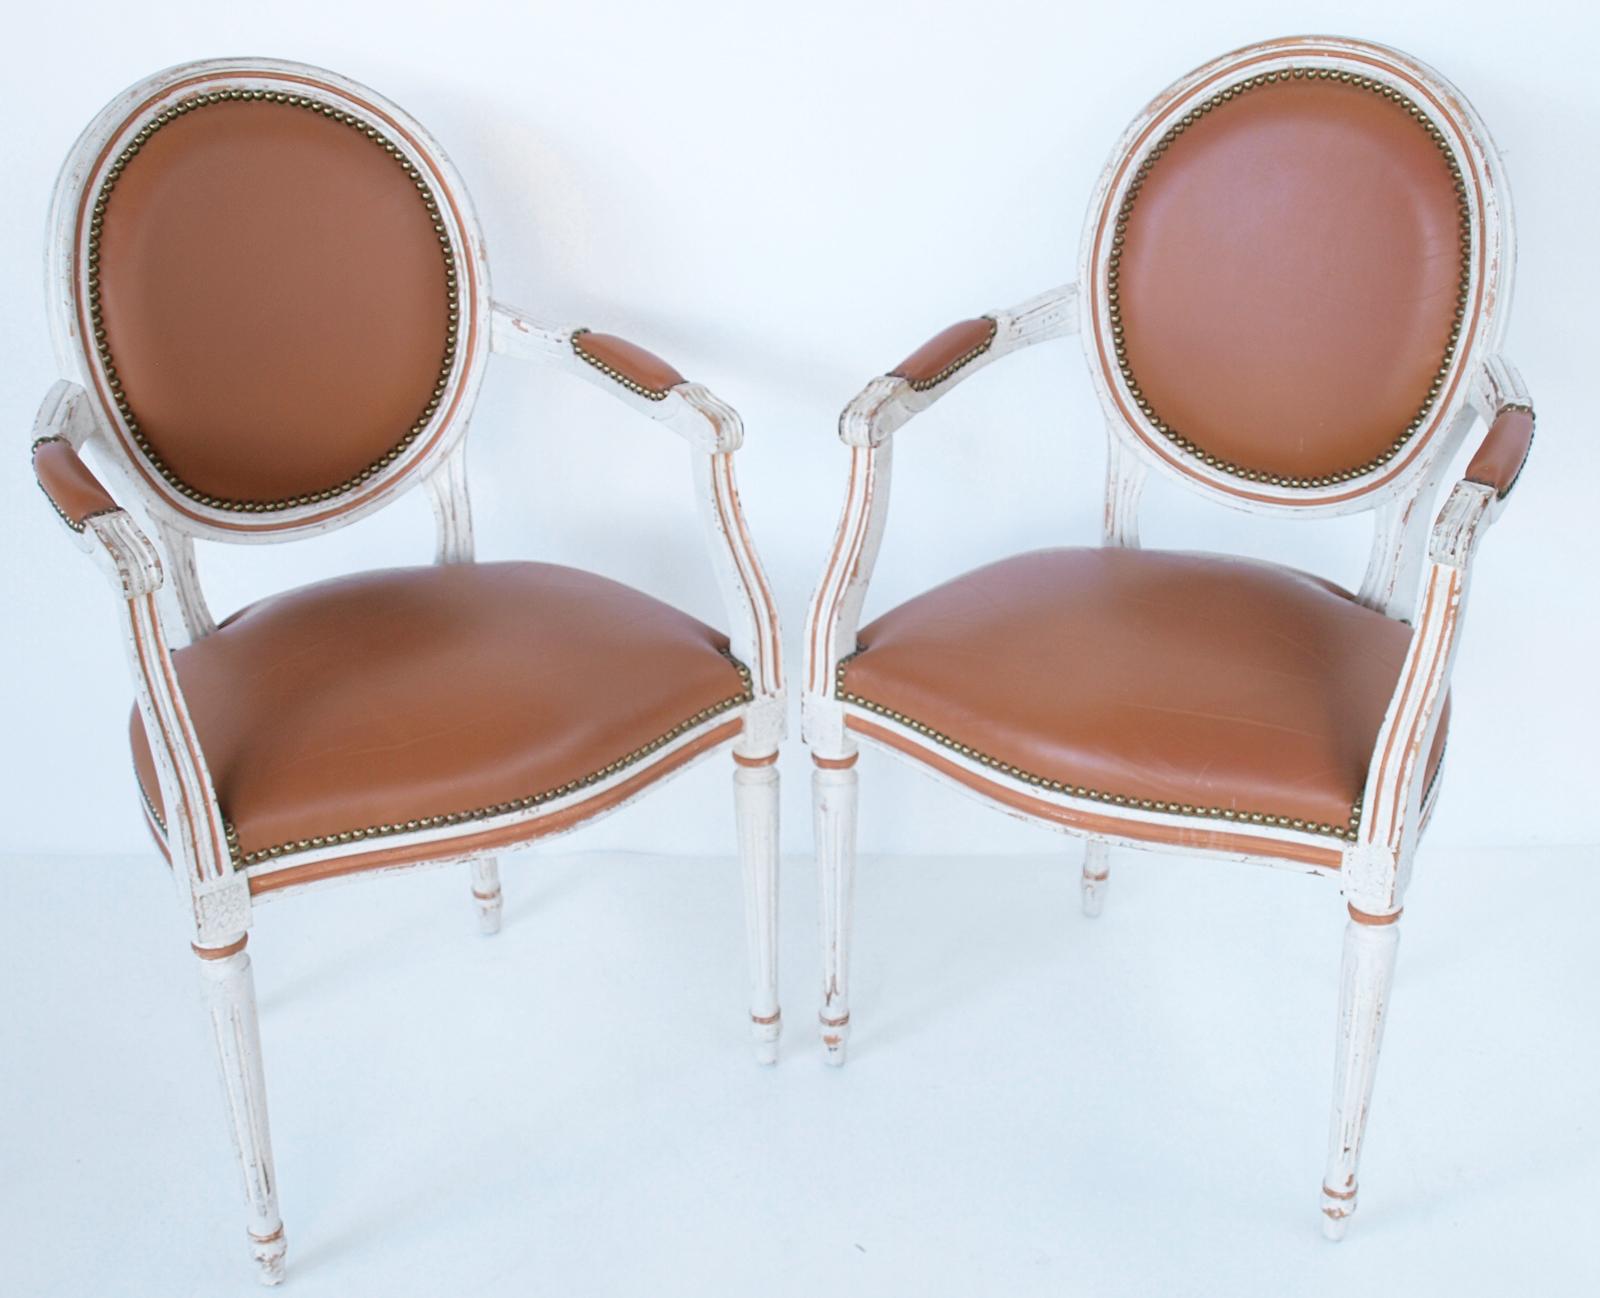 Pair of armchairs, having a painted finish showing natural wear, upholstered in leather with nailheads, each channeled frame inset by an oval padded backrest, oustwept arms with elbow cushions, finished in scrolls, supported by S-scroll terminals